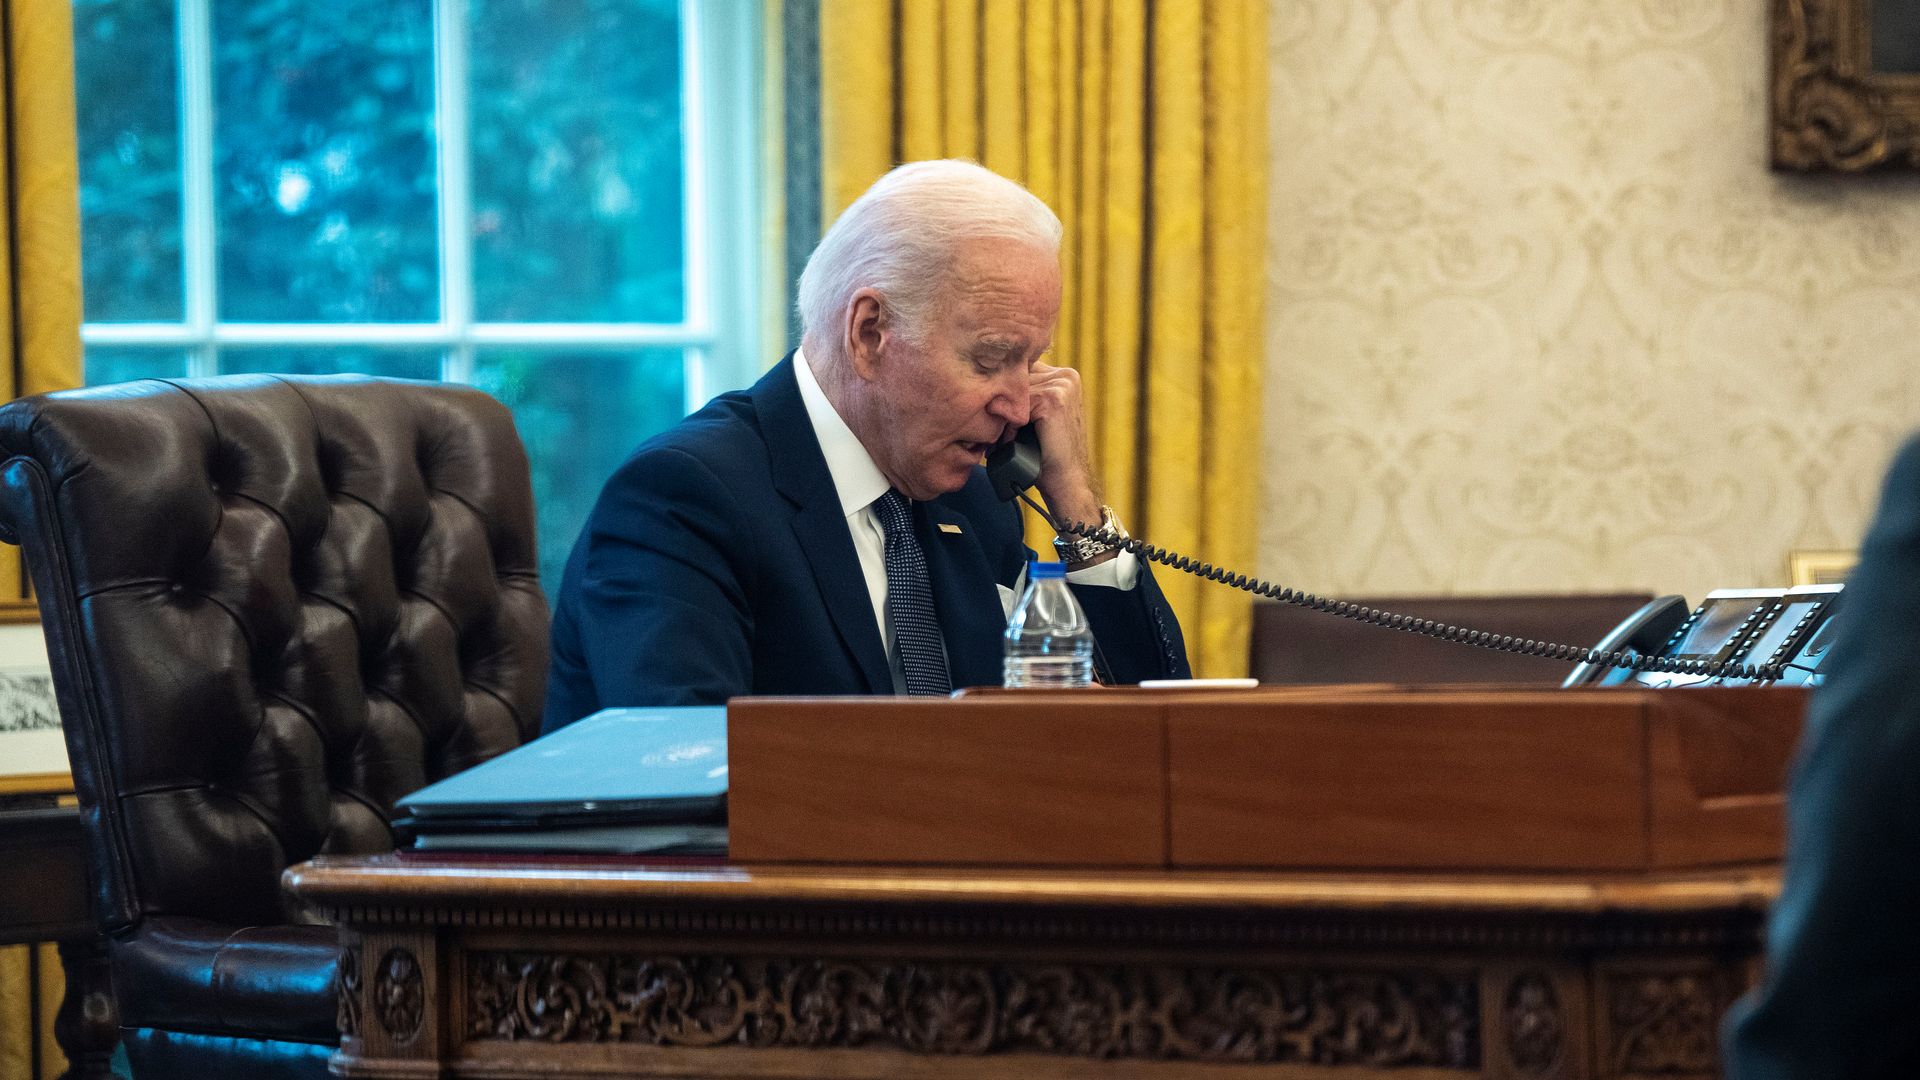 Some Republicans want to impeach Joe Biden but there's no real or actionable evidence to support a case against him.